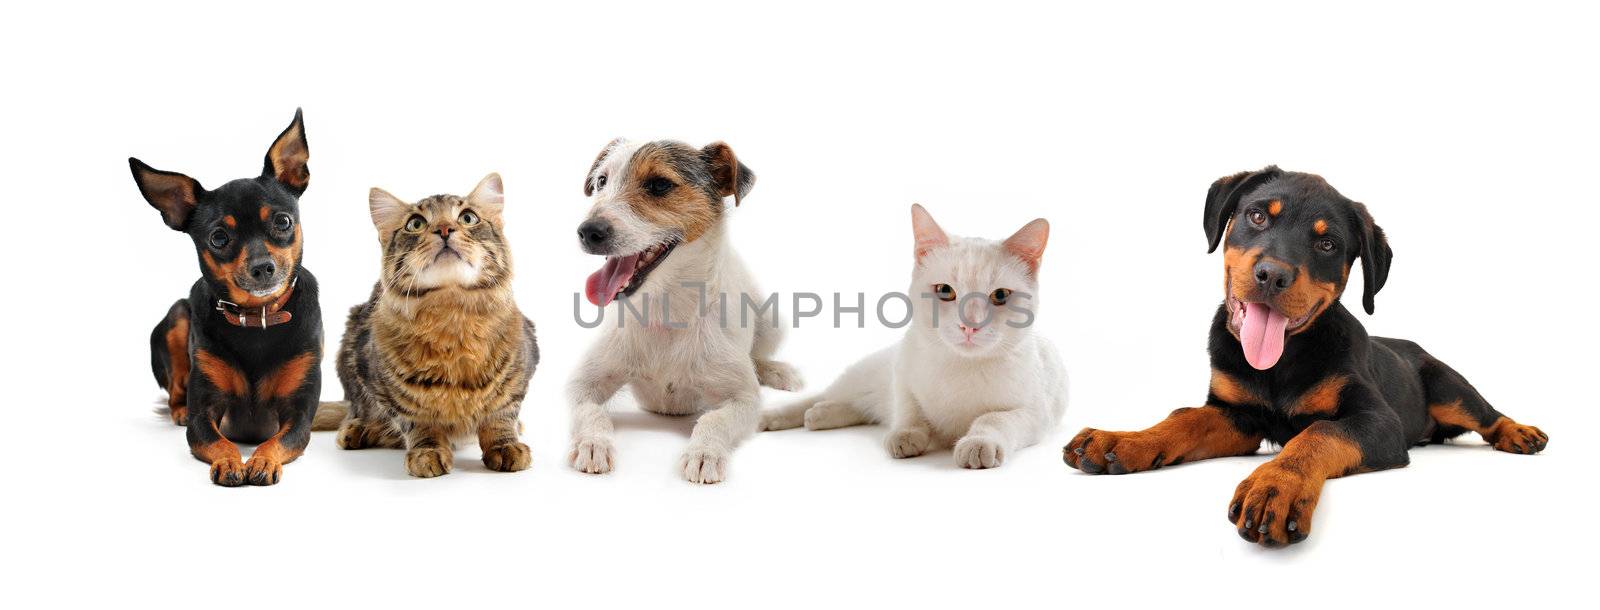 group of puppies and cats by cynoclub